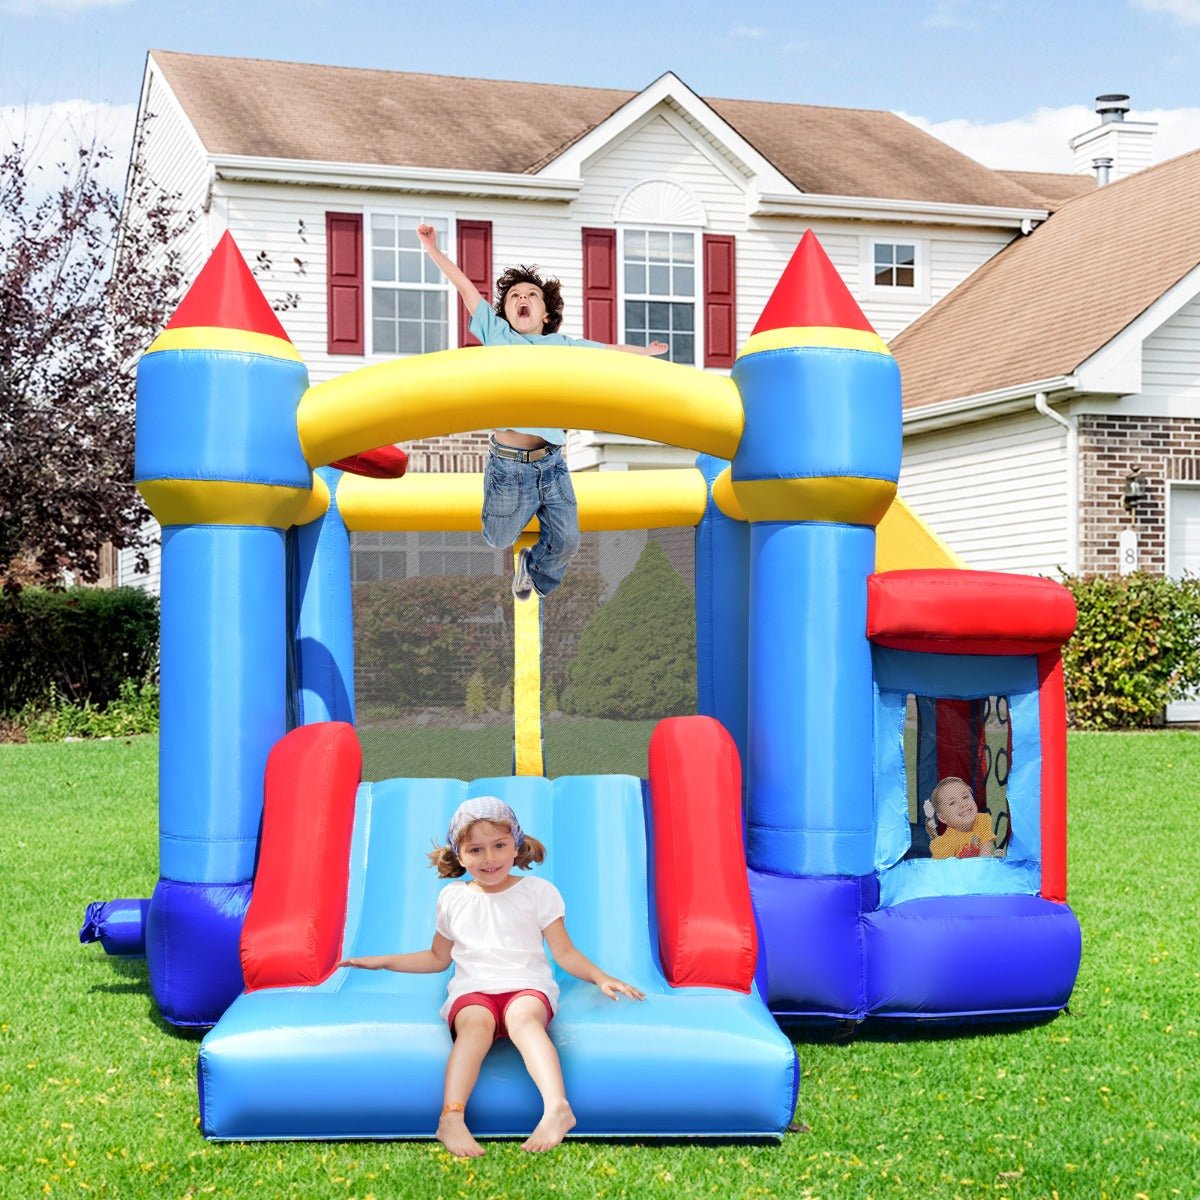 Backyard Excitement: Inflatable Bounce House with Slide (Blower Included)